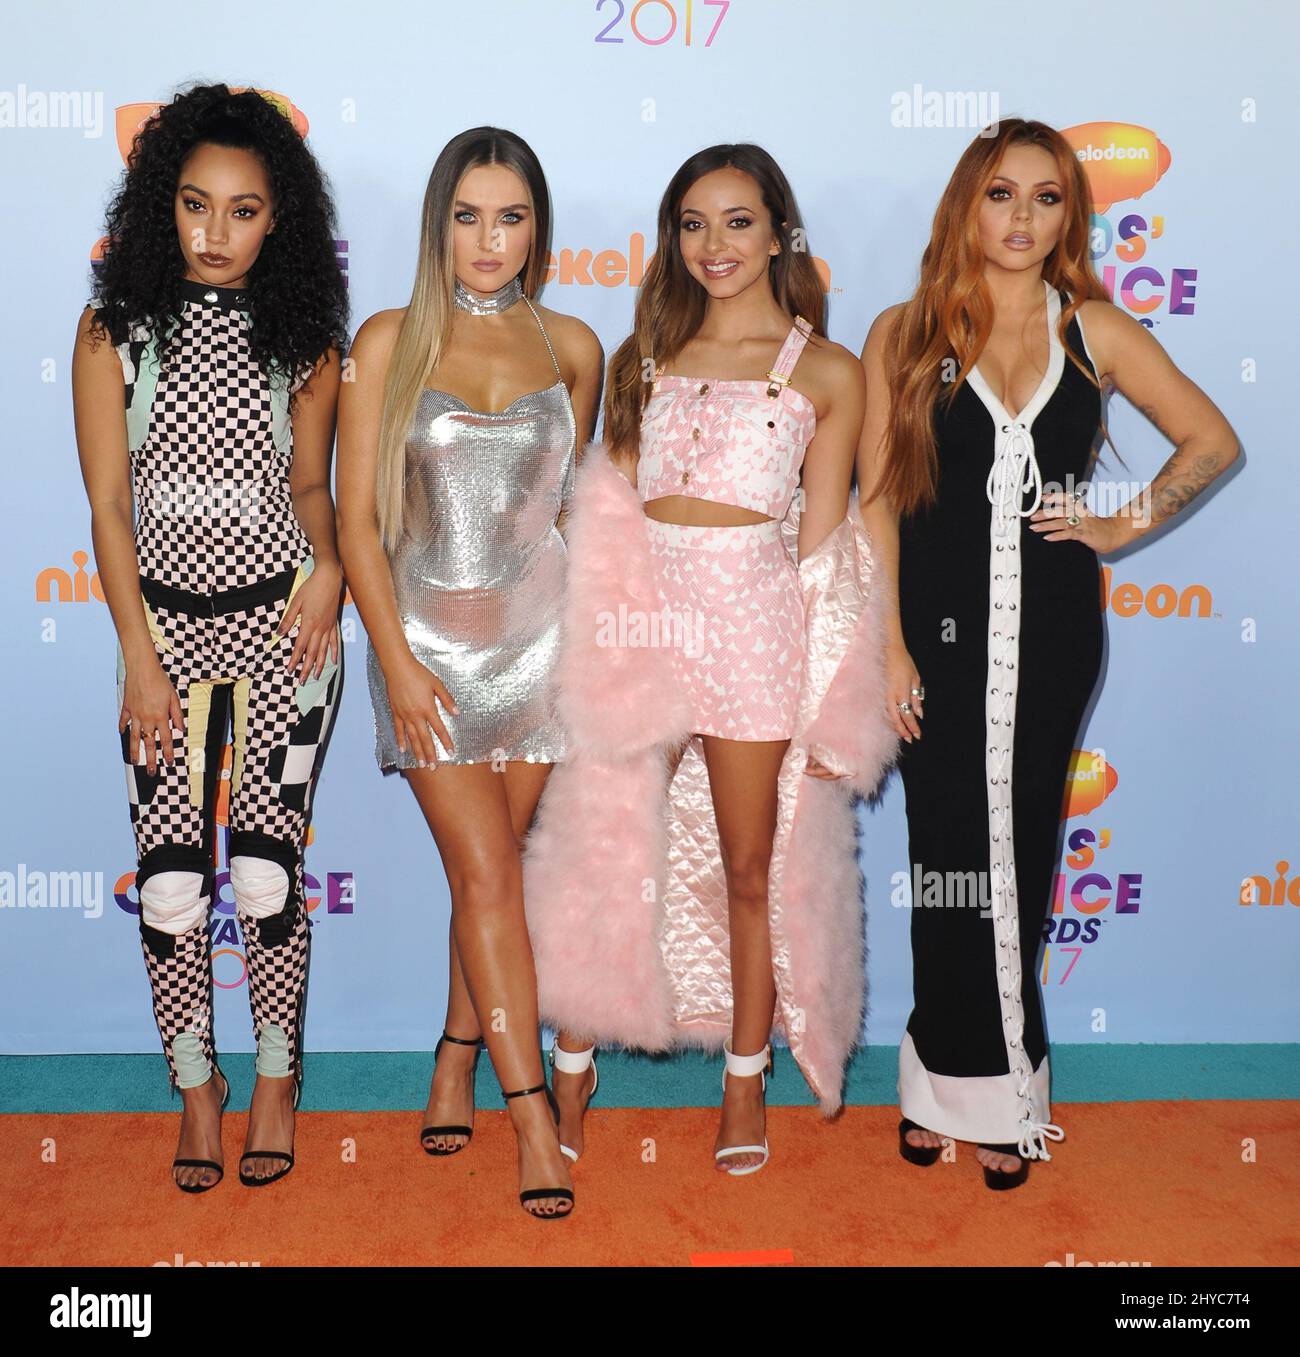 Leigh-Anne Pinnock, Perrie Edwards, Jesy Nelson, Jade Thirlwall of Little Mix arrives at the Kids' Choice Awards 2017 - Arrivals held at USC Galen Center Stock Photo